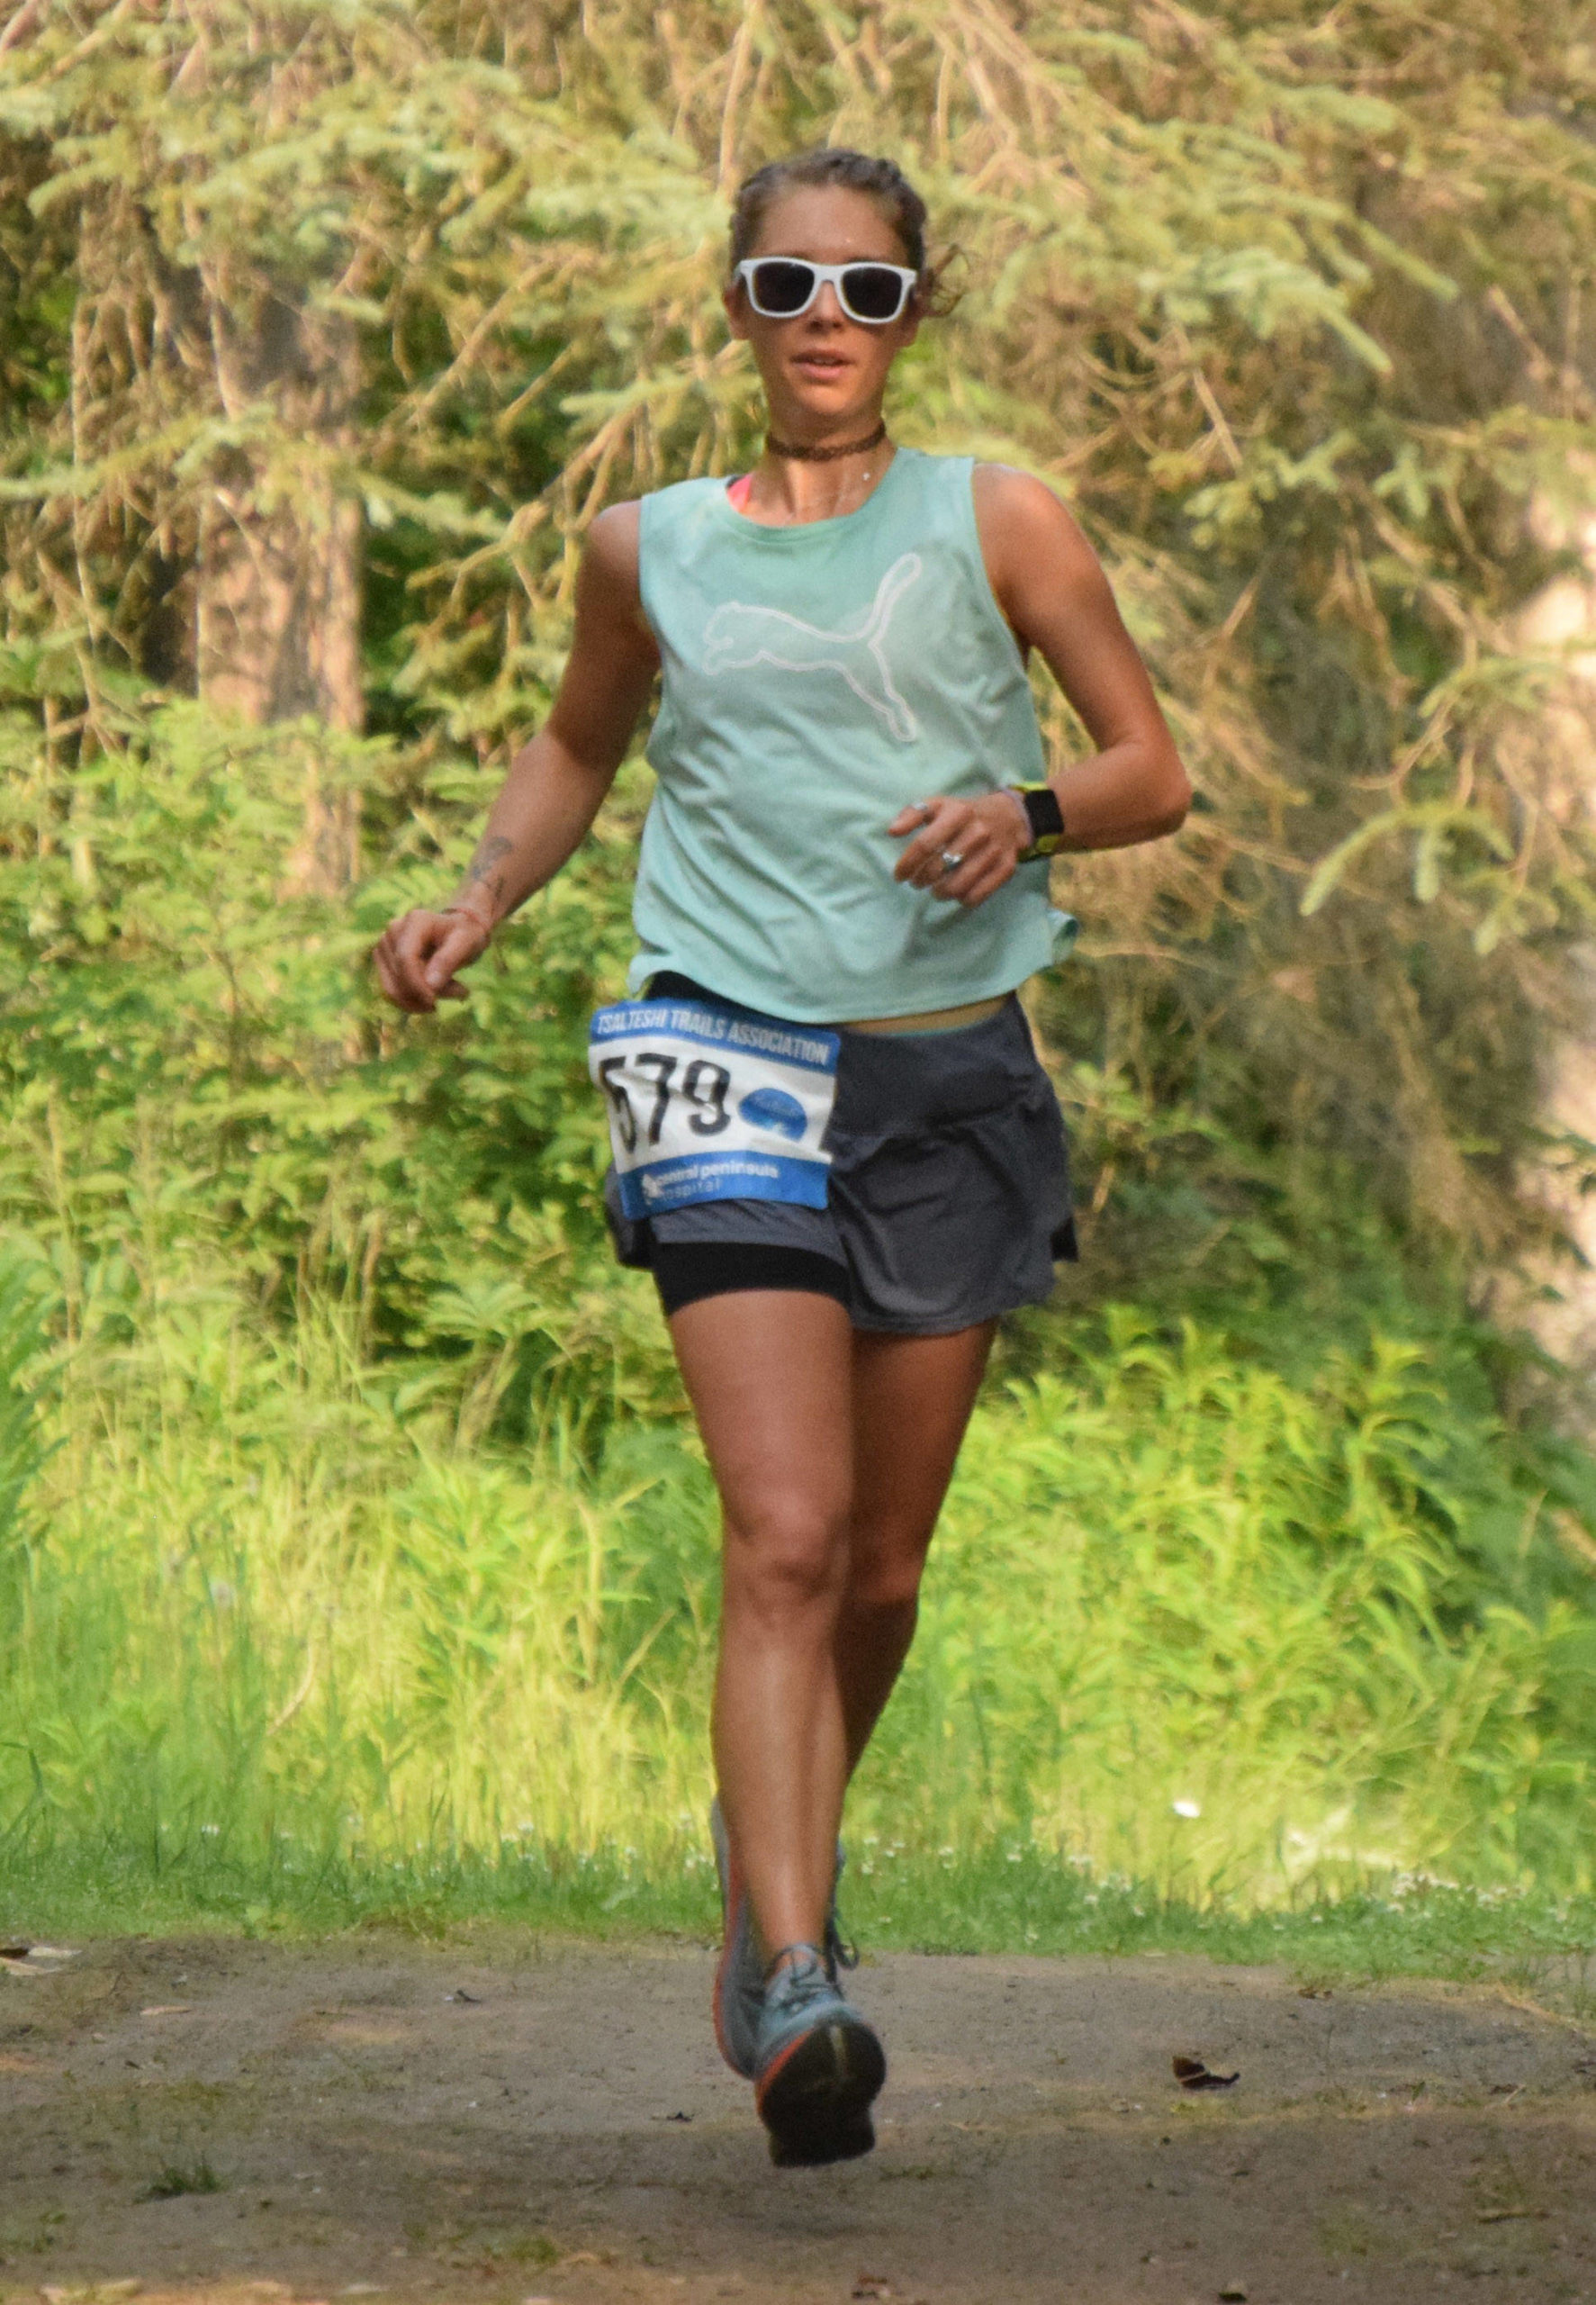 Shelby Dykstra, of Soldotna, runs to victory in the 10-kilometer event at the Rotary Unity Run on Saturday, July 17, 2021, at Tsalteshi Trails just outside of Soldotna, Alaska. (Photo by Jeff Helminiak/Peninsula Clarion)